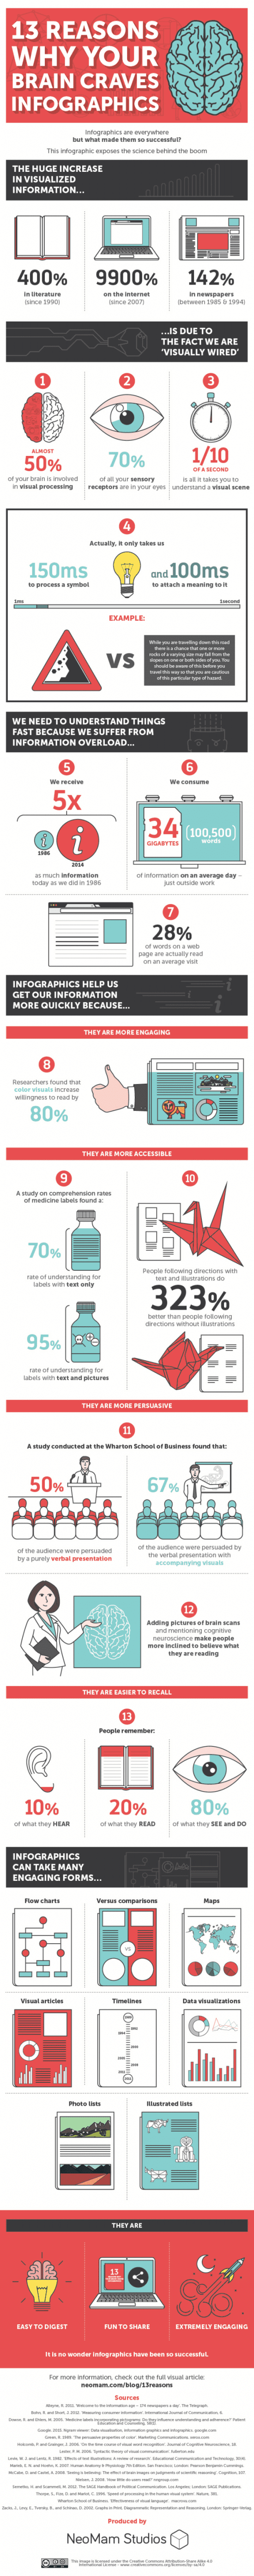 35 reasons your brain craves infographics